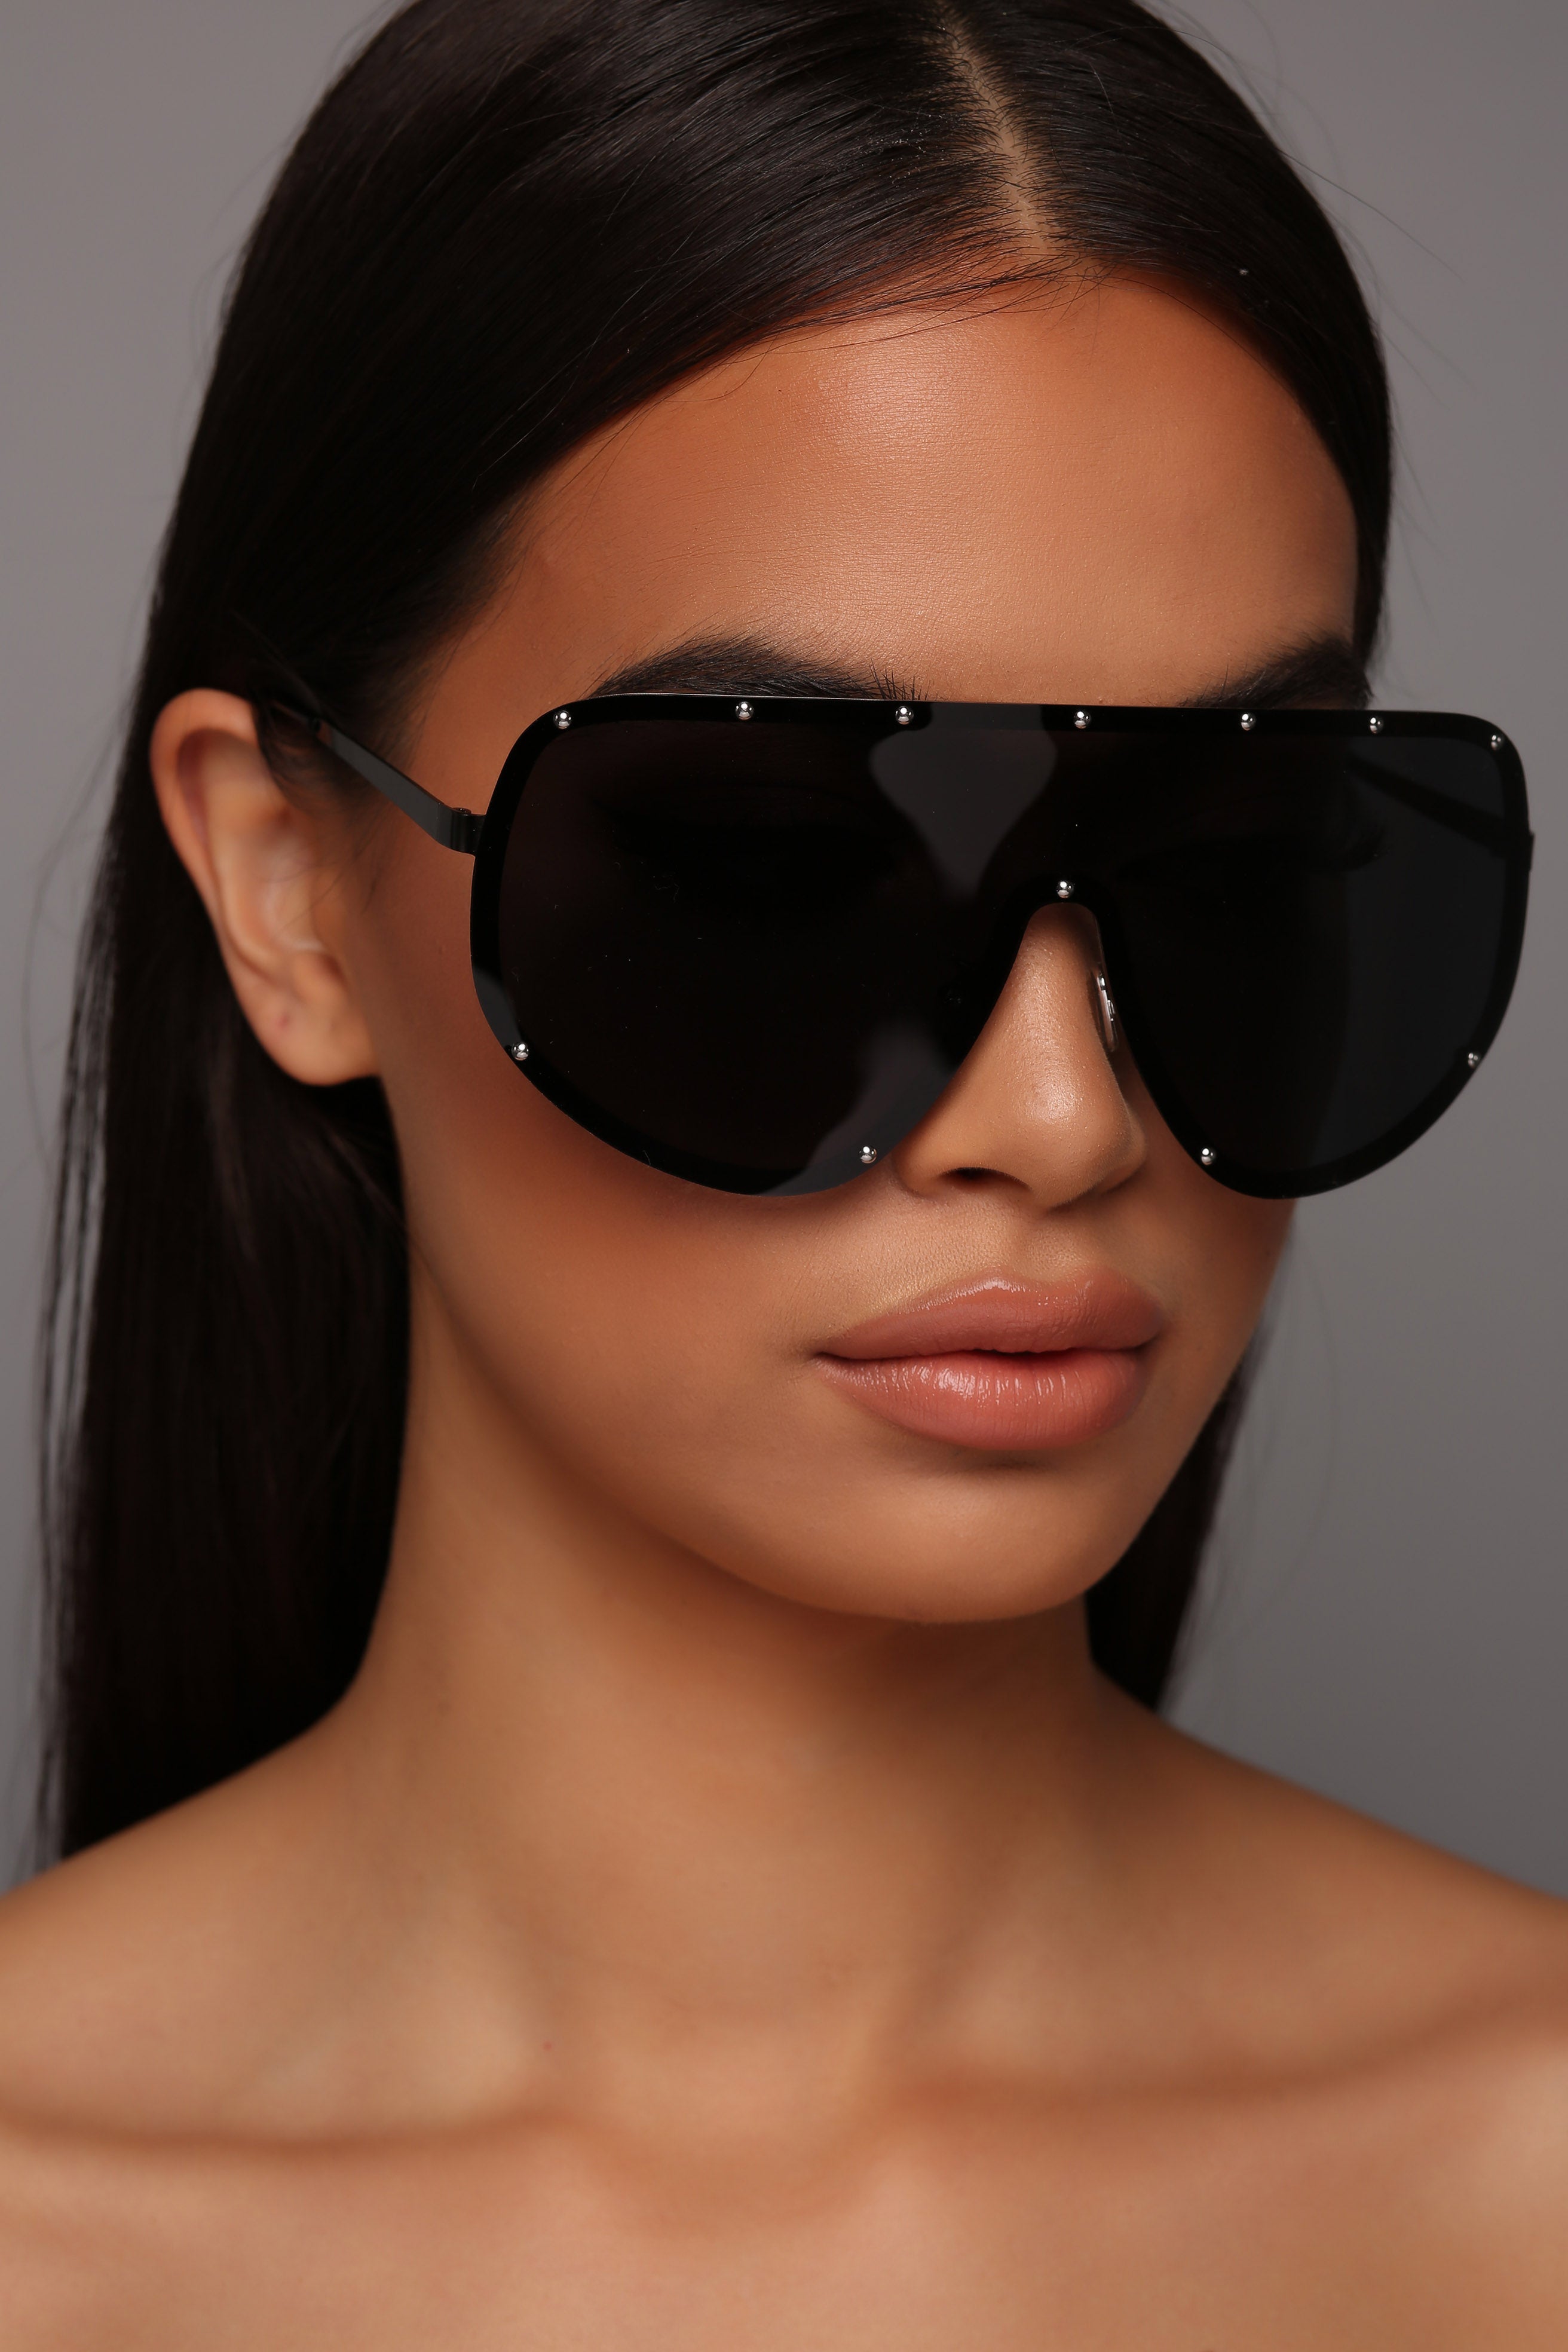 Blog by Thea Basiliou Tagged sunglasses at night